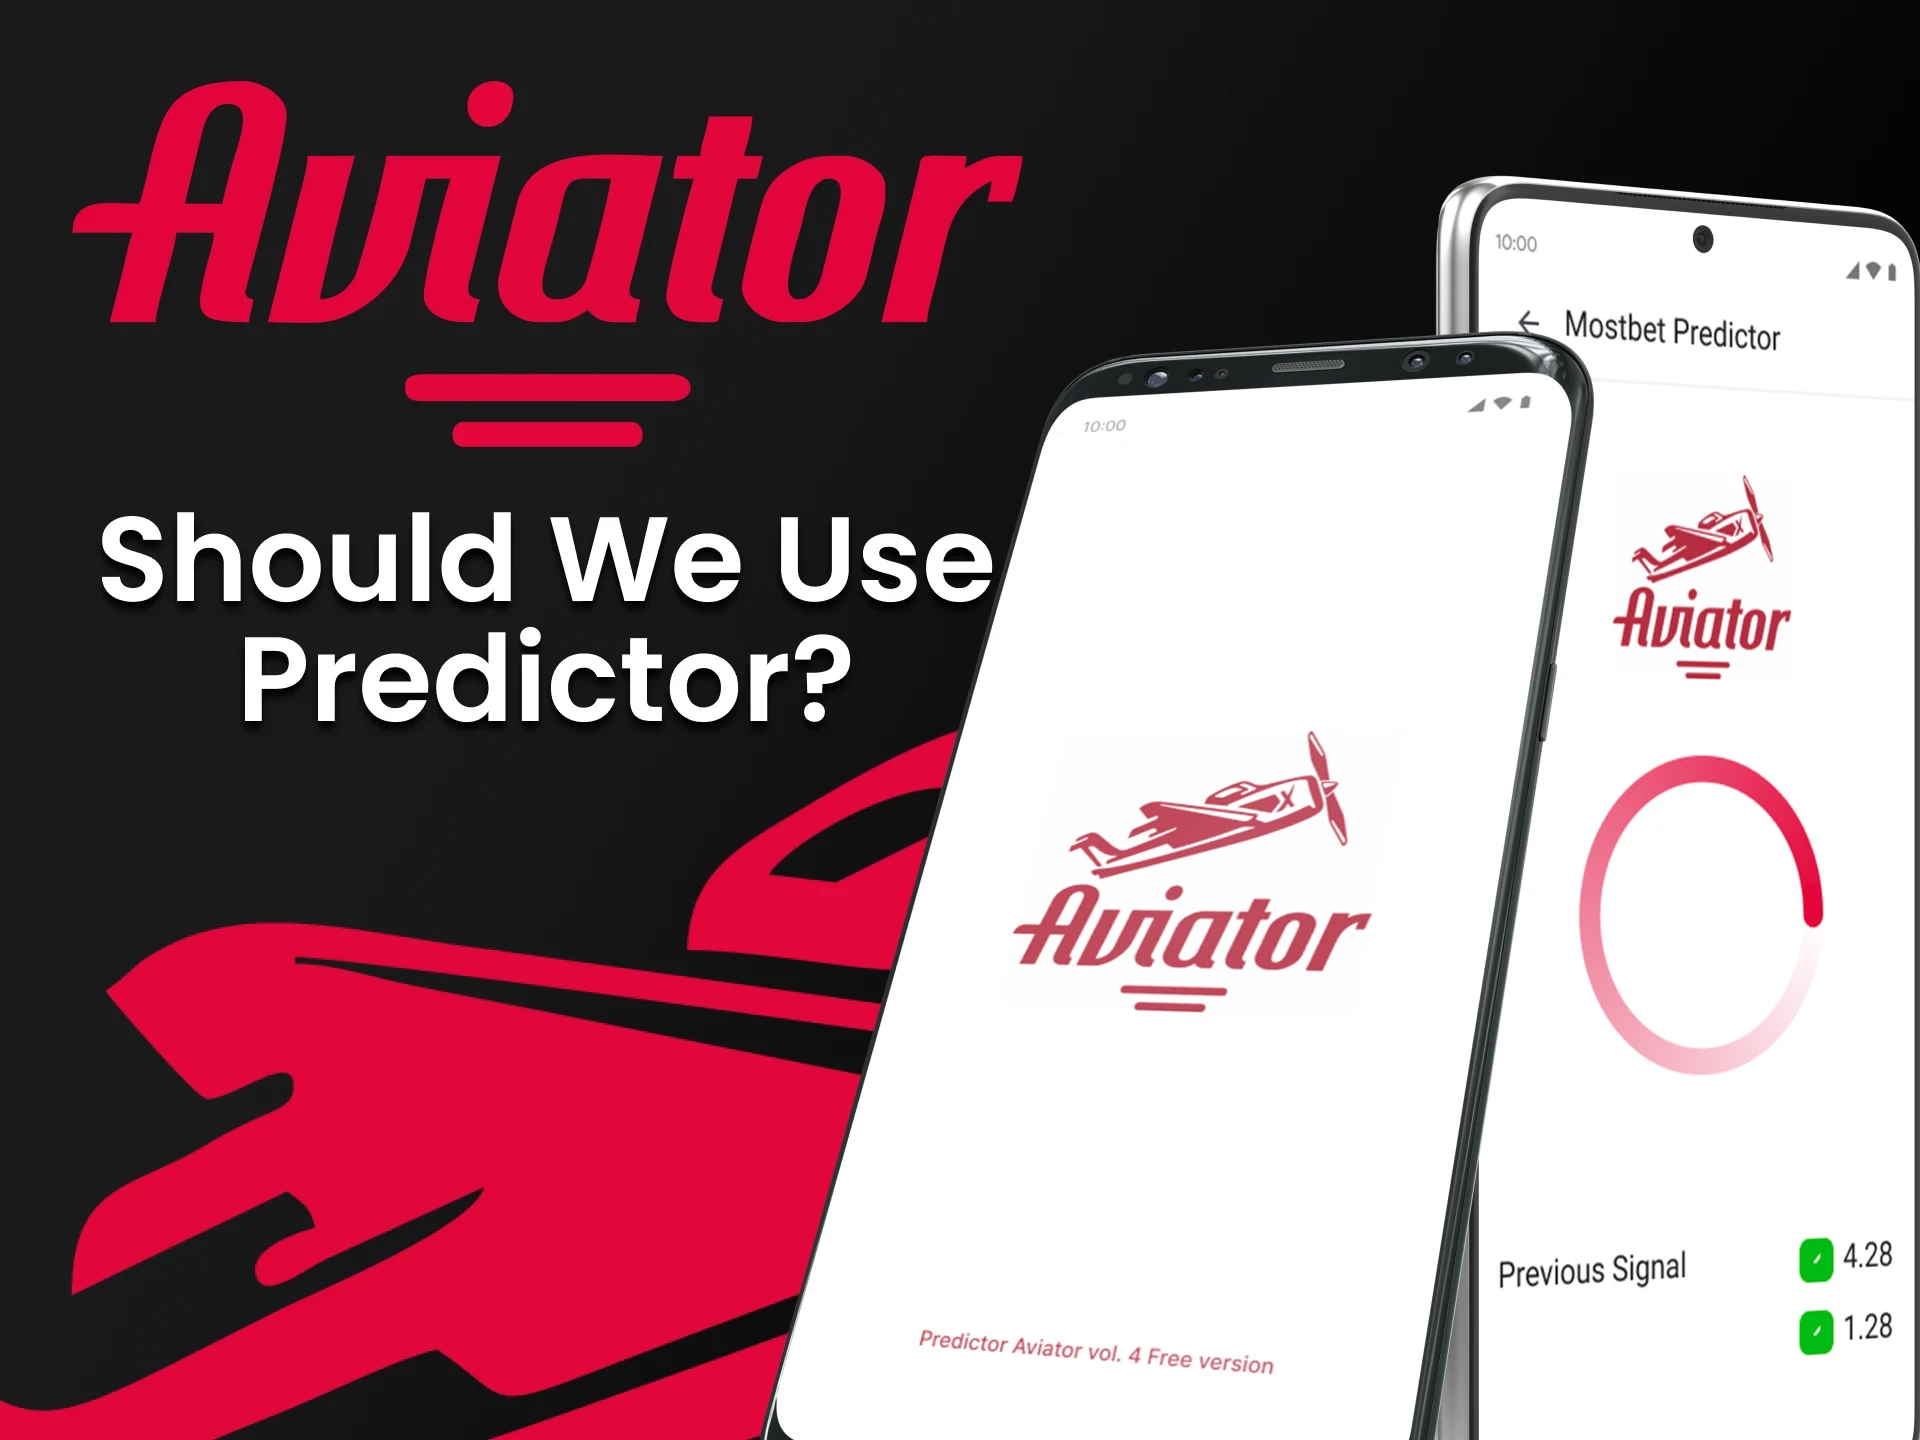 The choice is yours whether to use Predictor for the Aviator game.